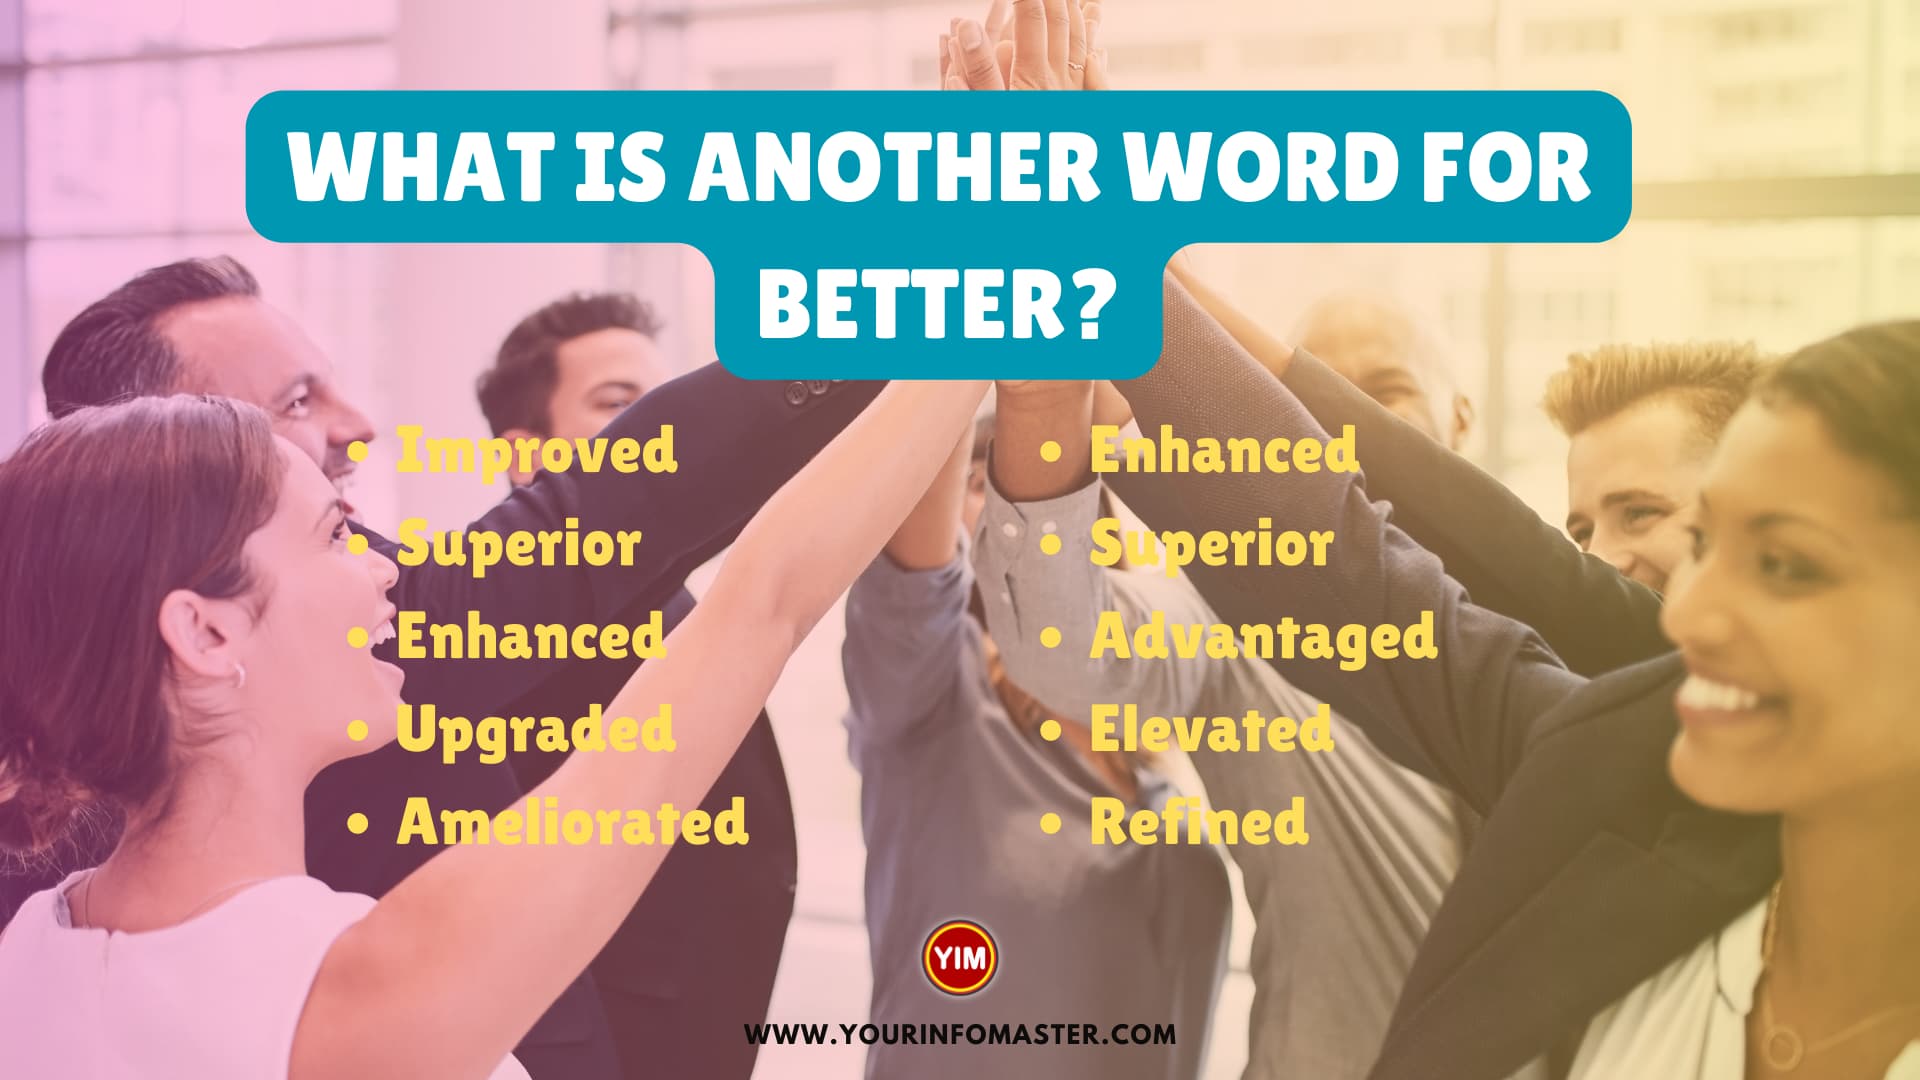 What is another word for Better